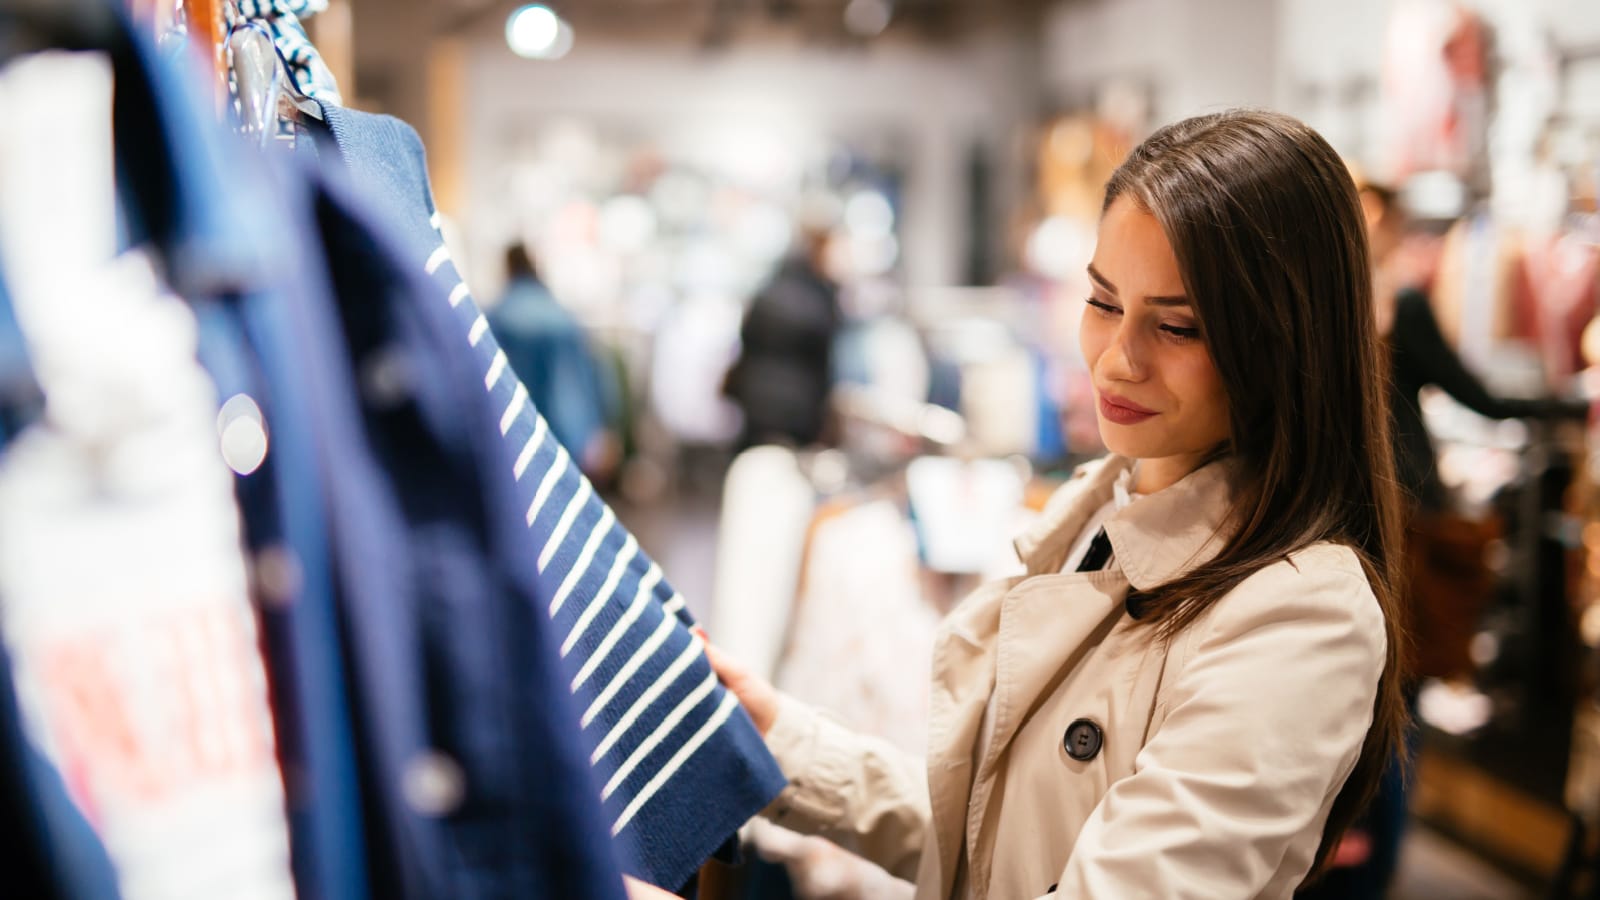 A woman shopping for clothes in a retail store. She admires a blue and white stripped top on the hanger.